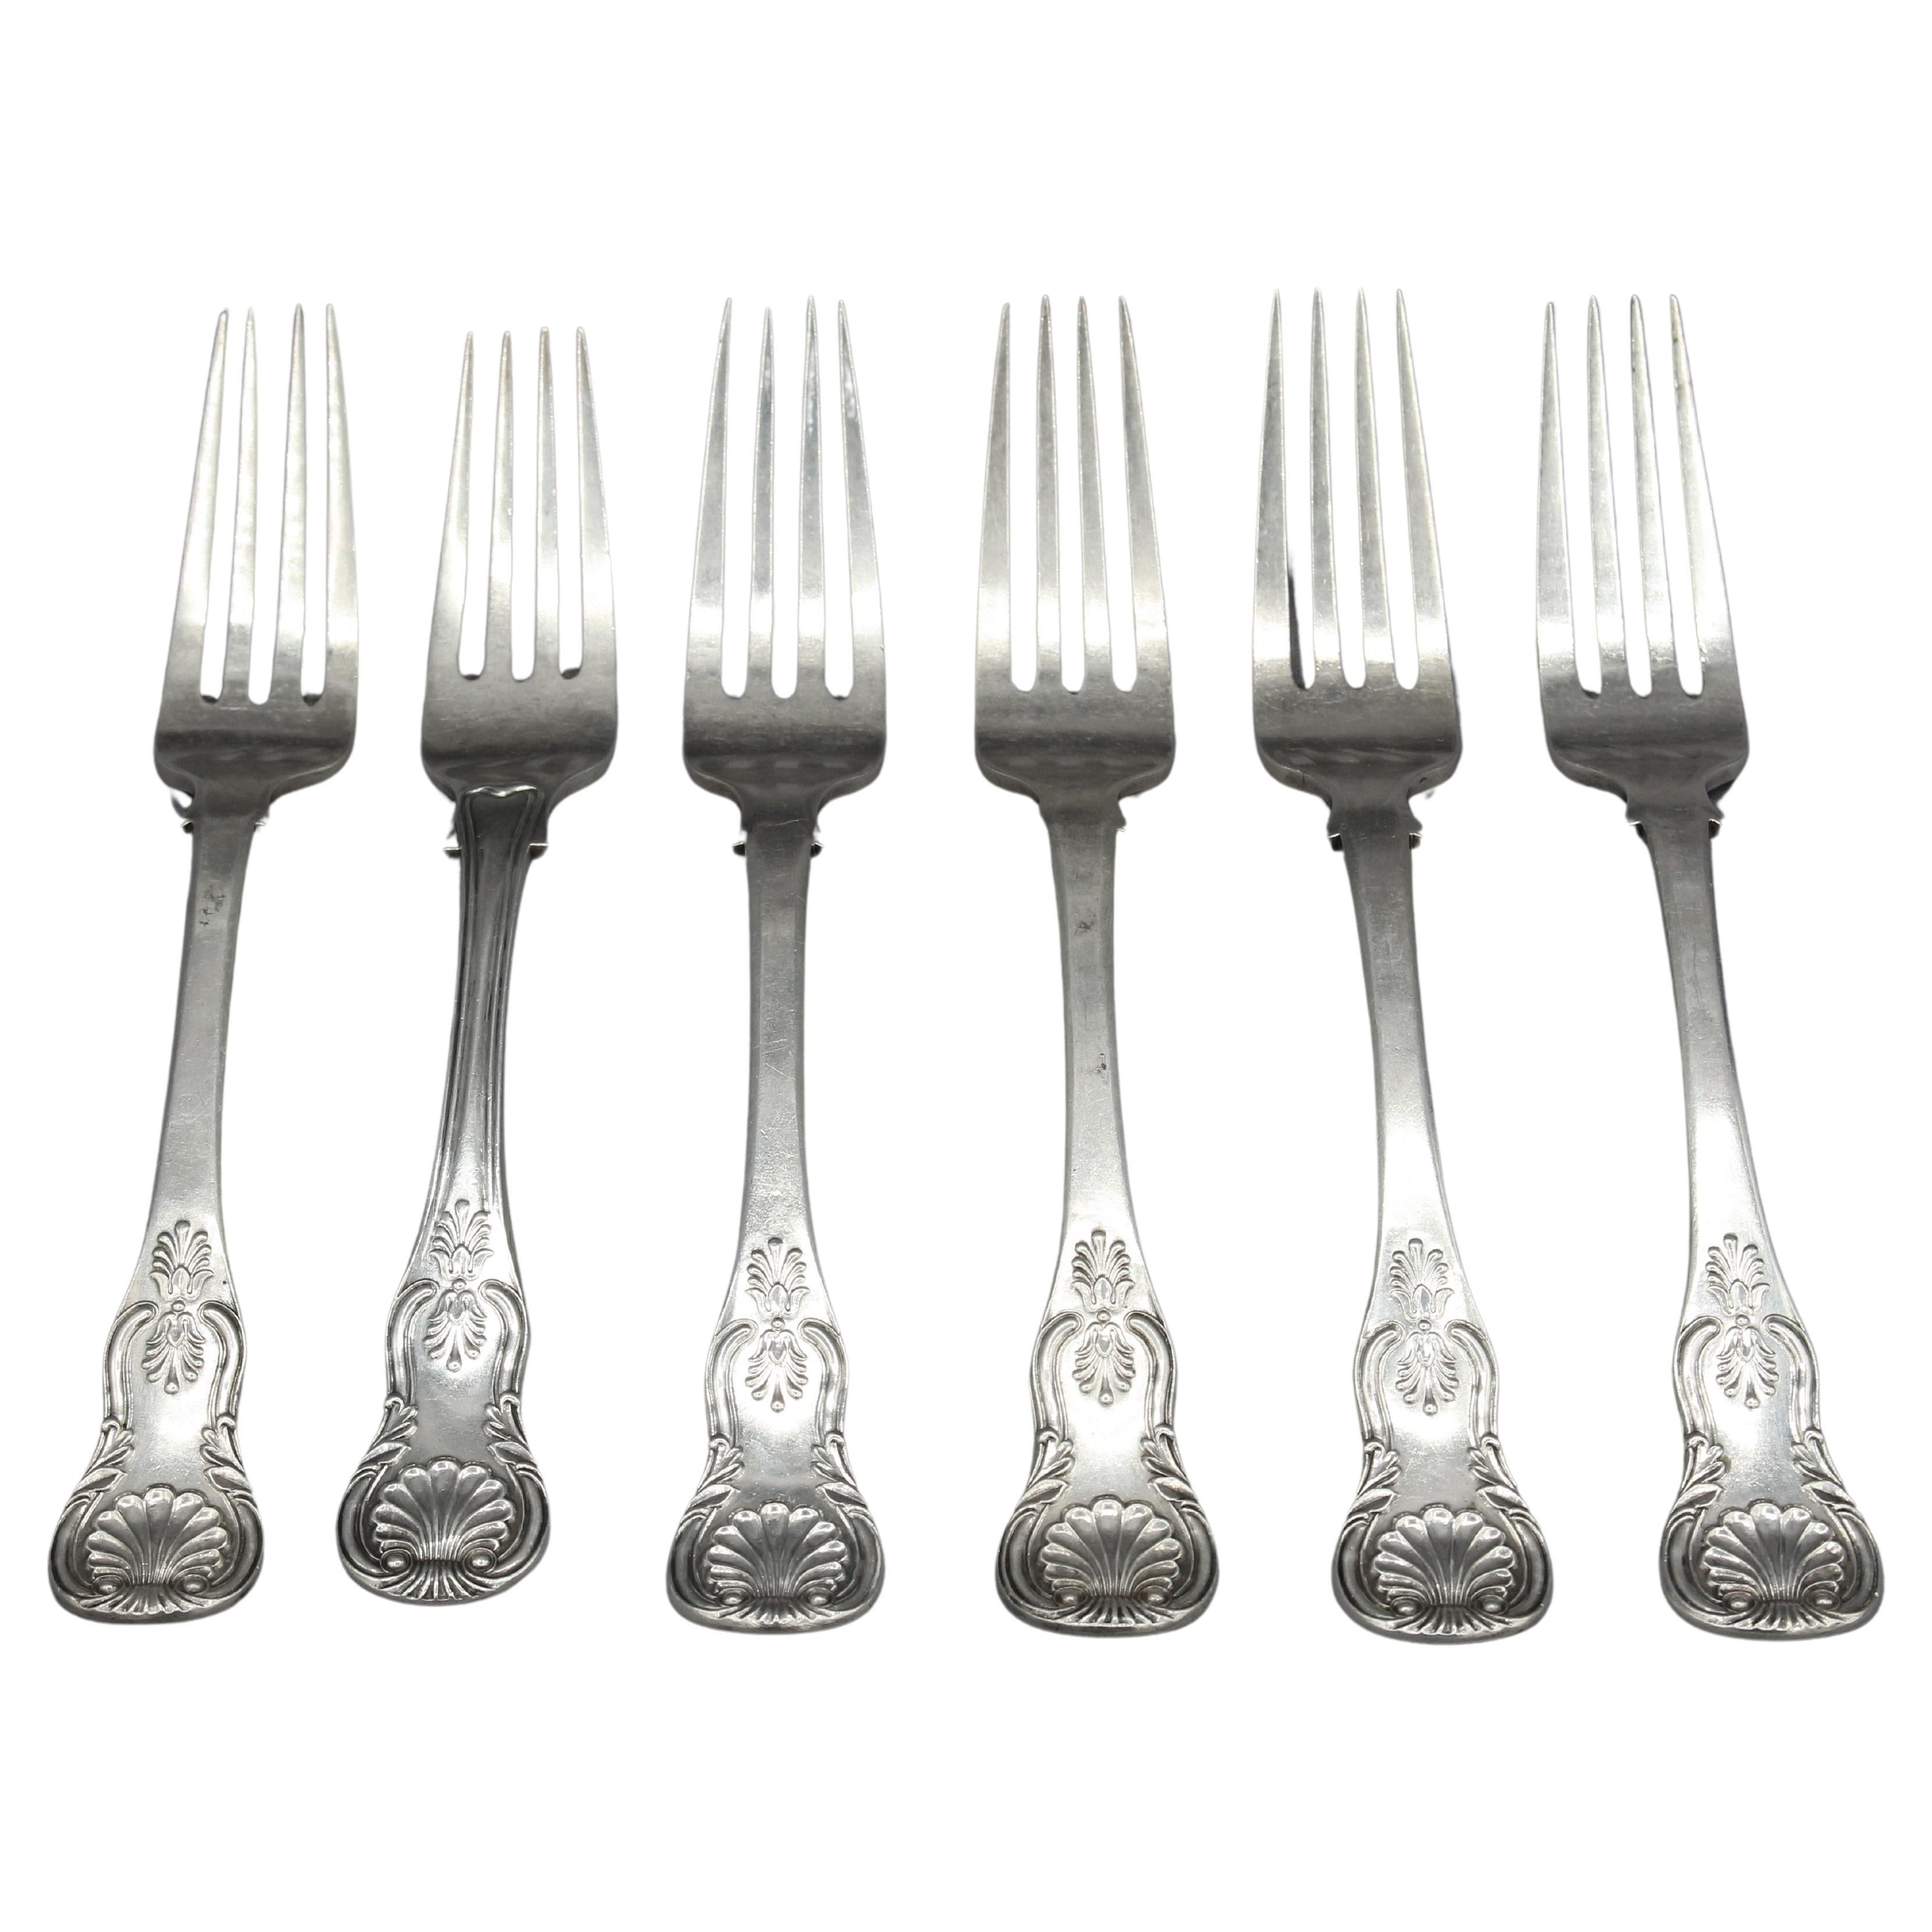 c. 1835 Set of 6 Coin Silver Dinner Forks by R. & W. Wilson